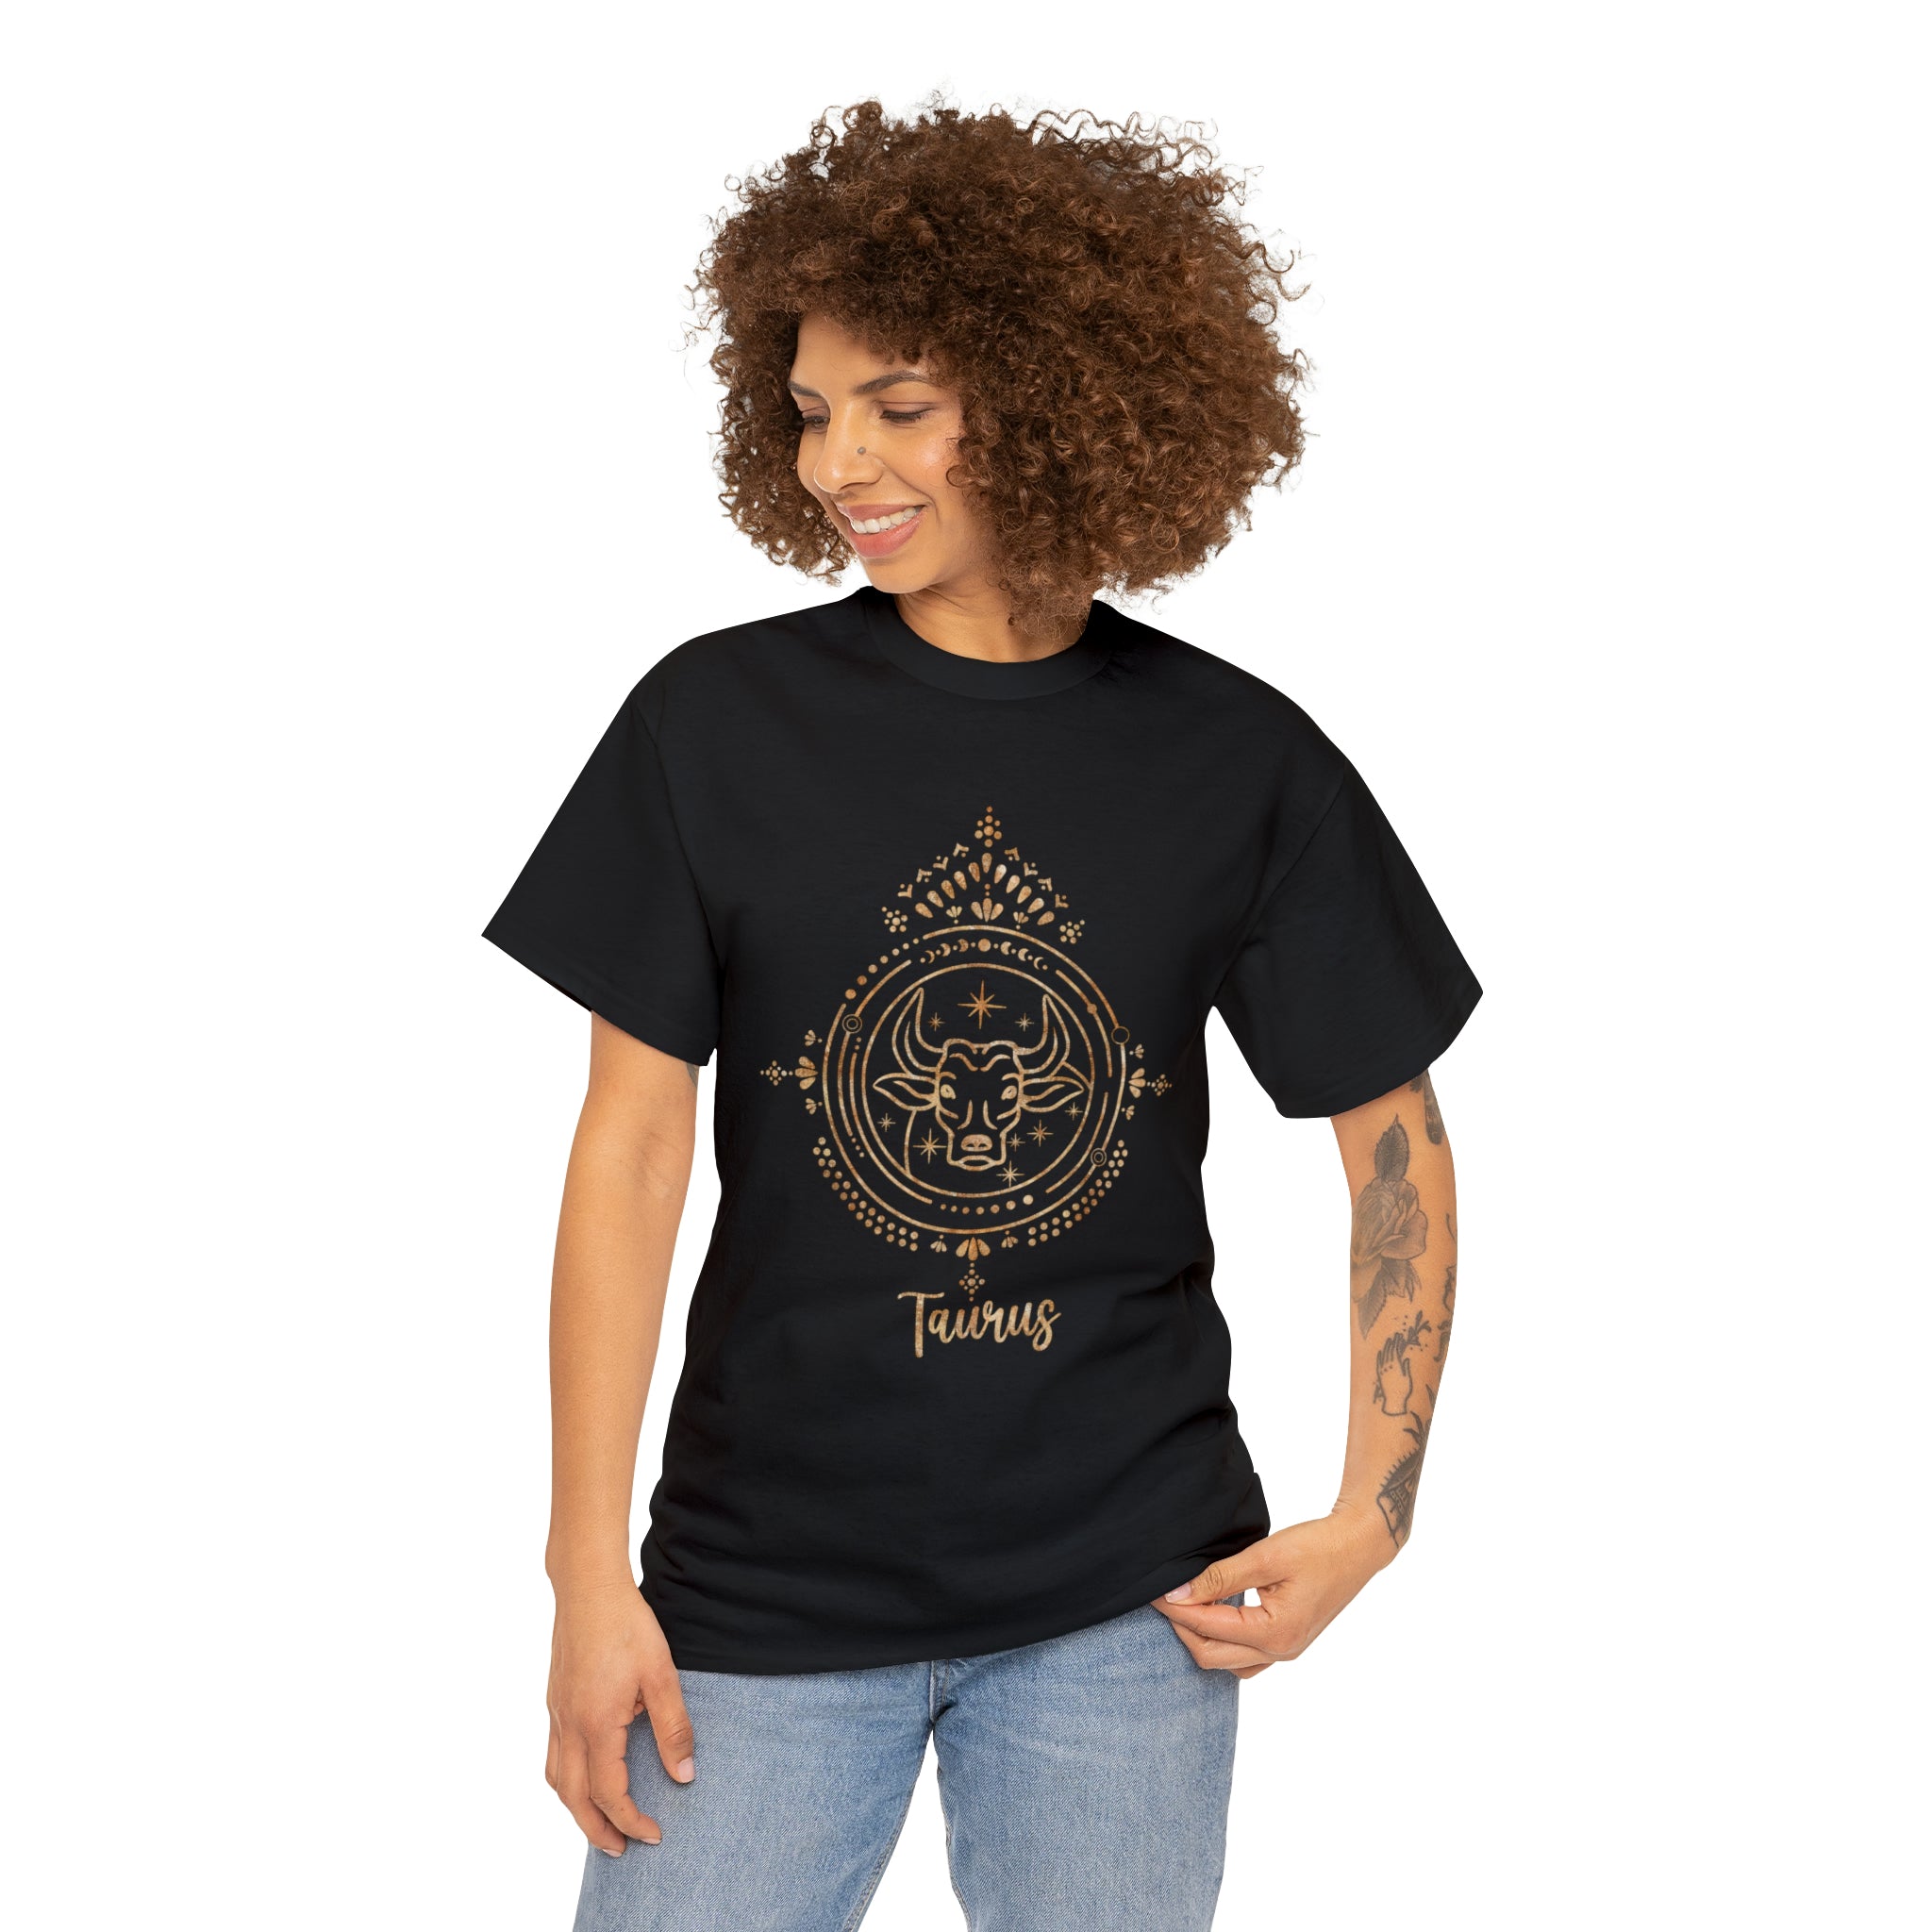 A woman with a steadfast and pleasure-seeking Taurus personality, wearing a black Tauruses t-shirt with a gold design.